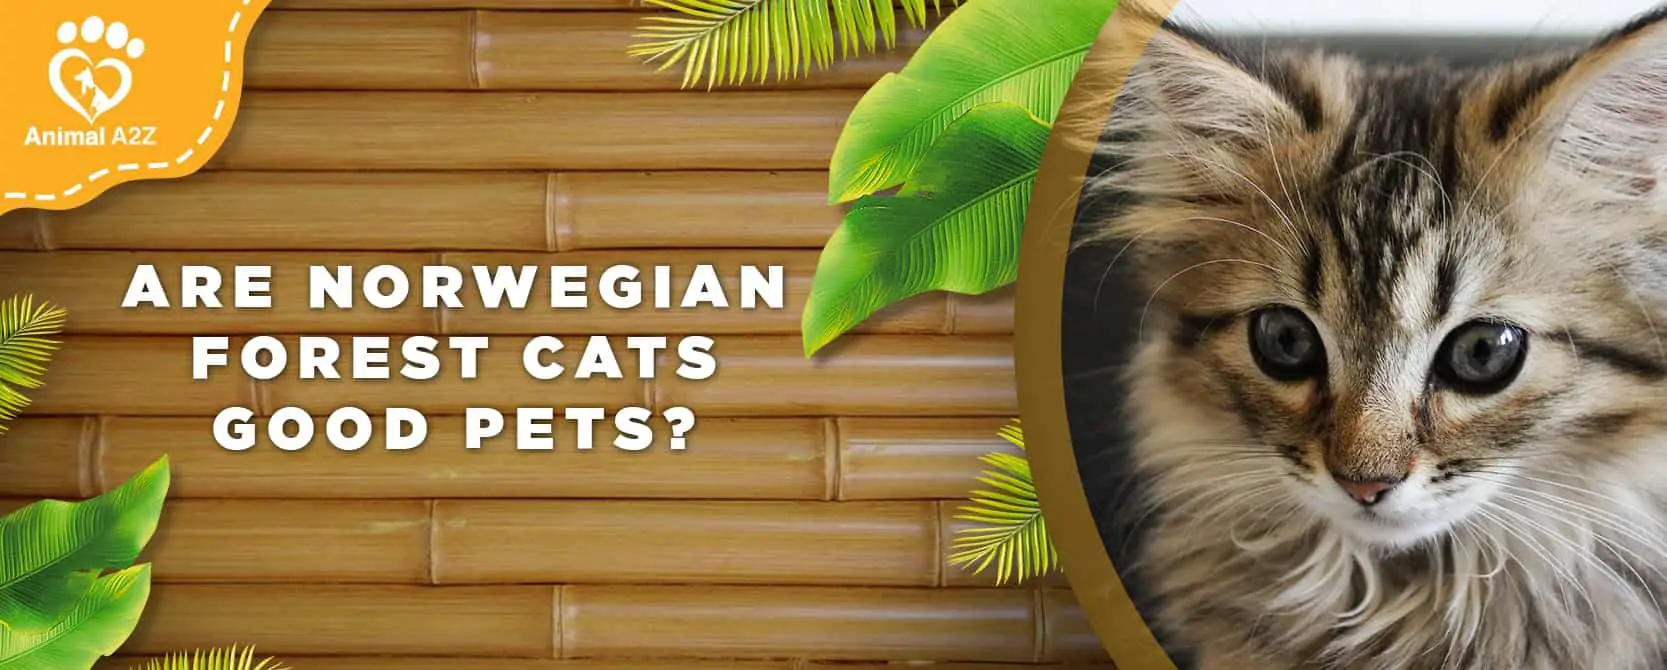 Are Norwegian Forest cats good pets?